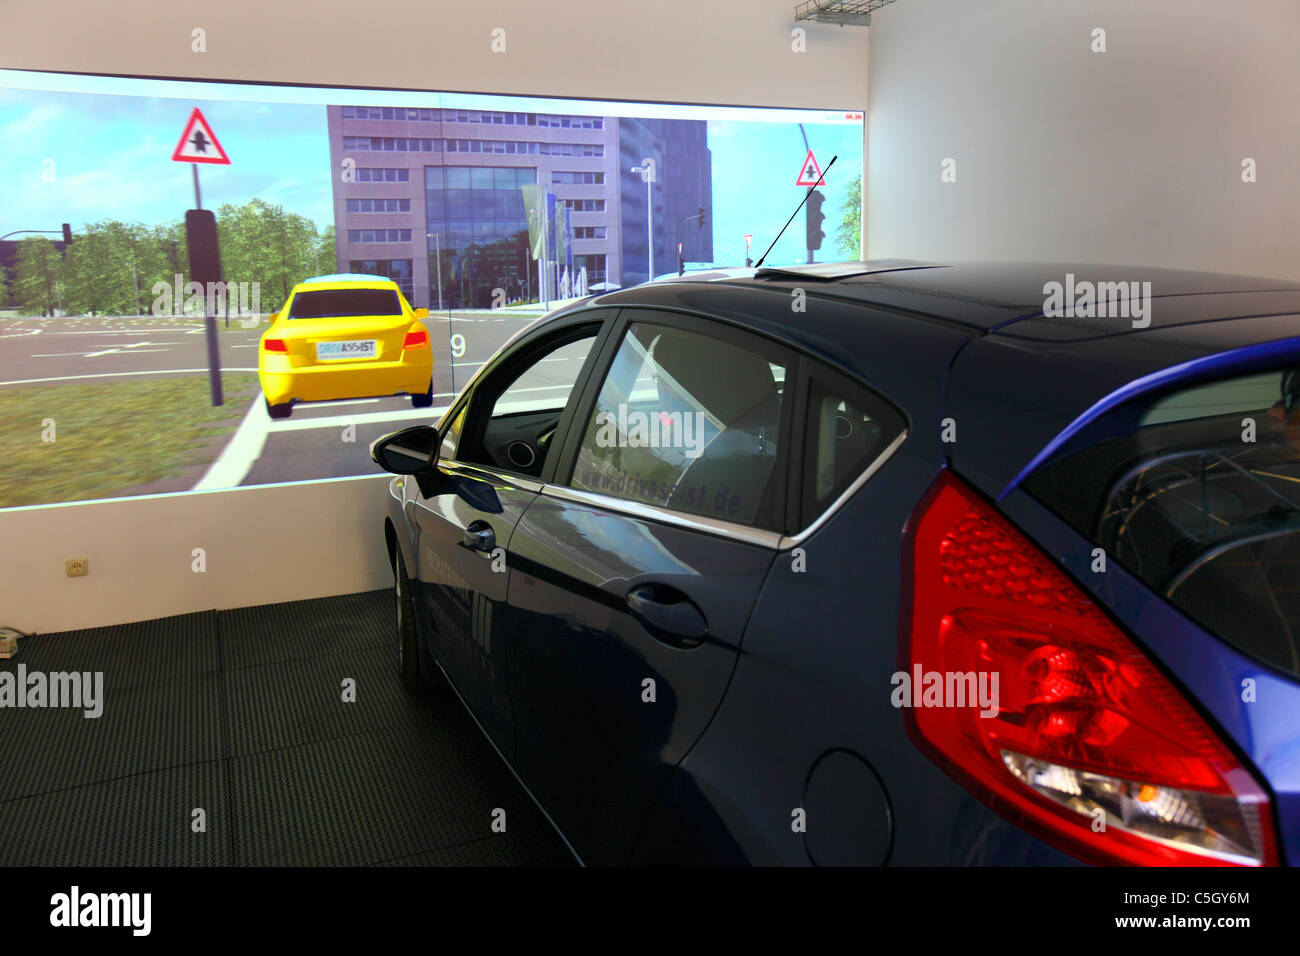 University Duisburg-Essen, simulator for electric mobility. Simulation of performance capability of electric vehicles. Stock Photo